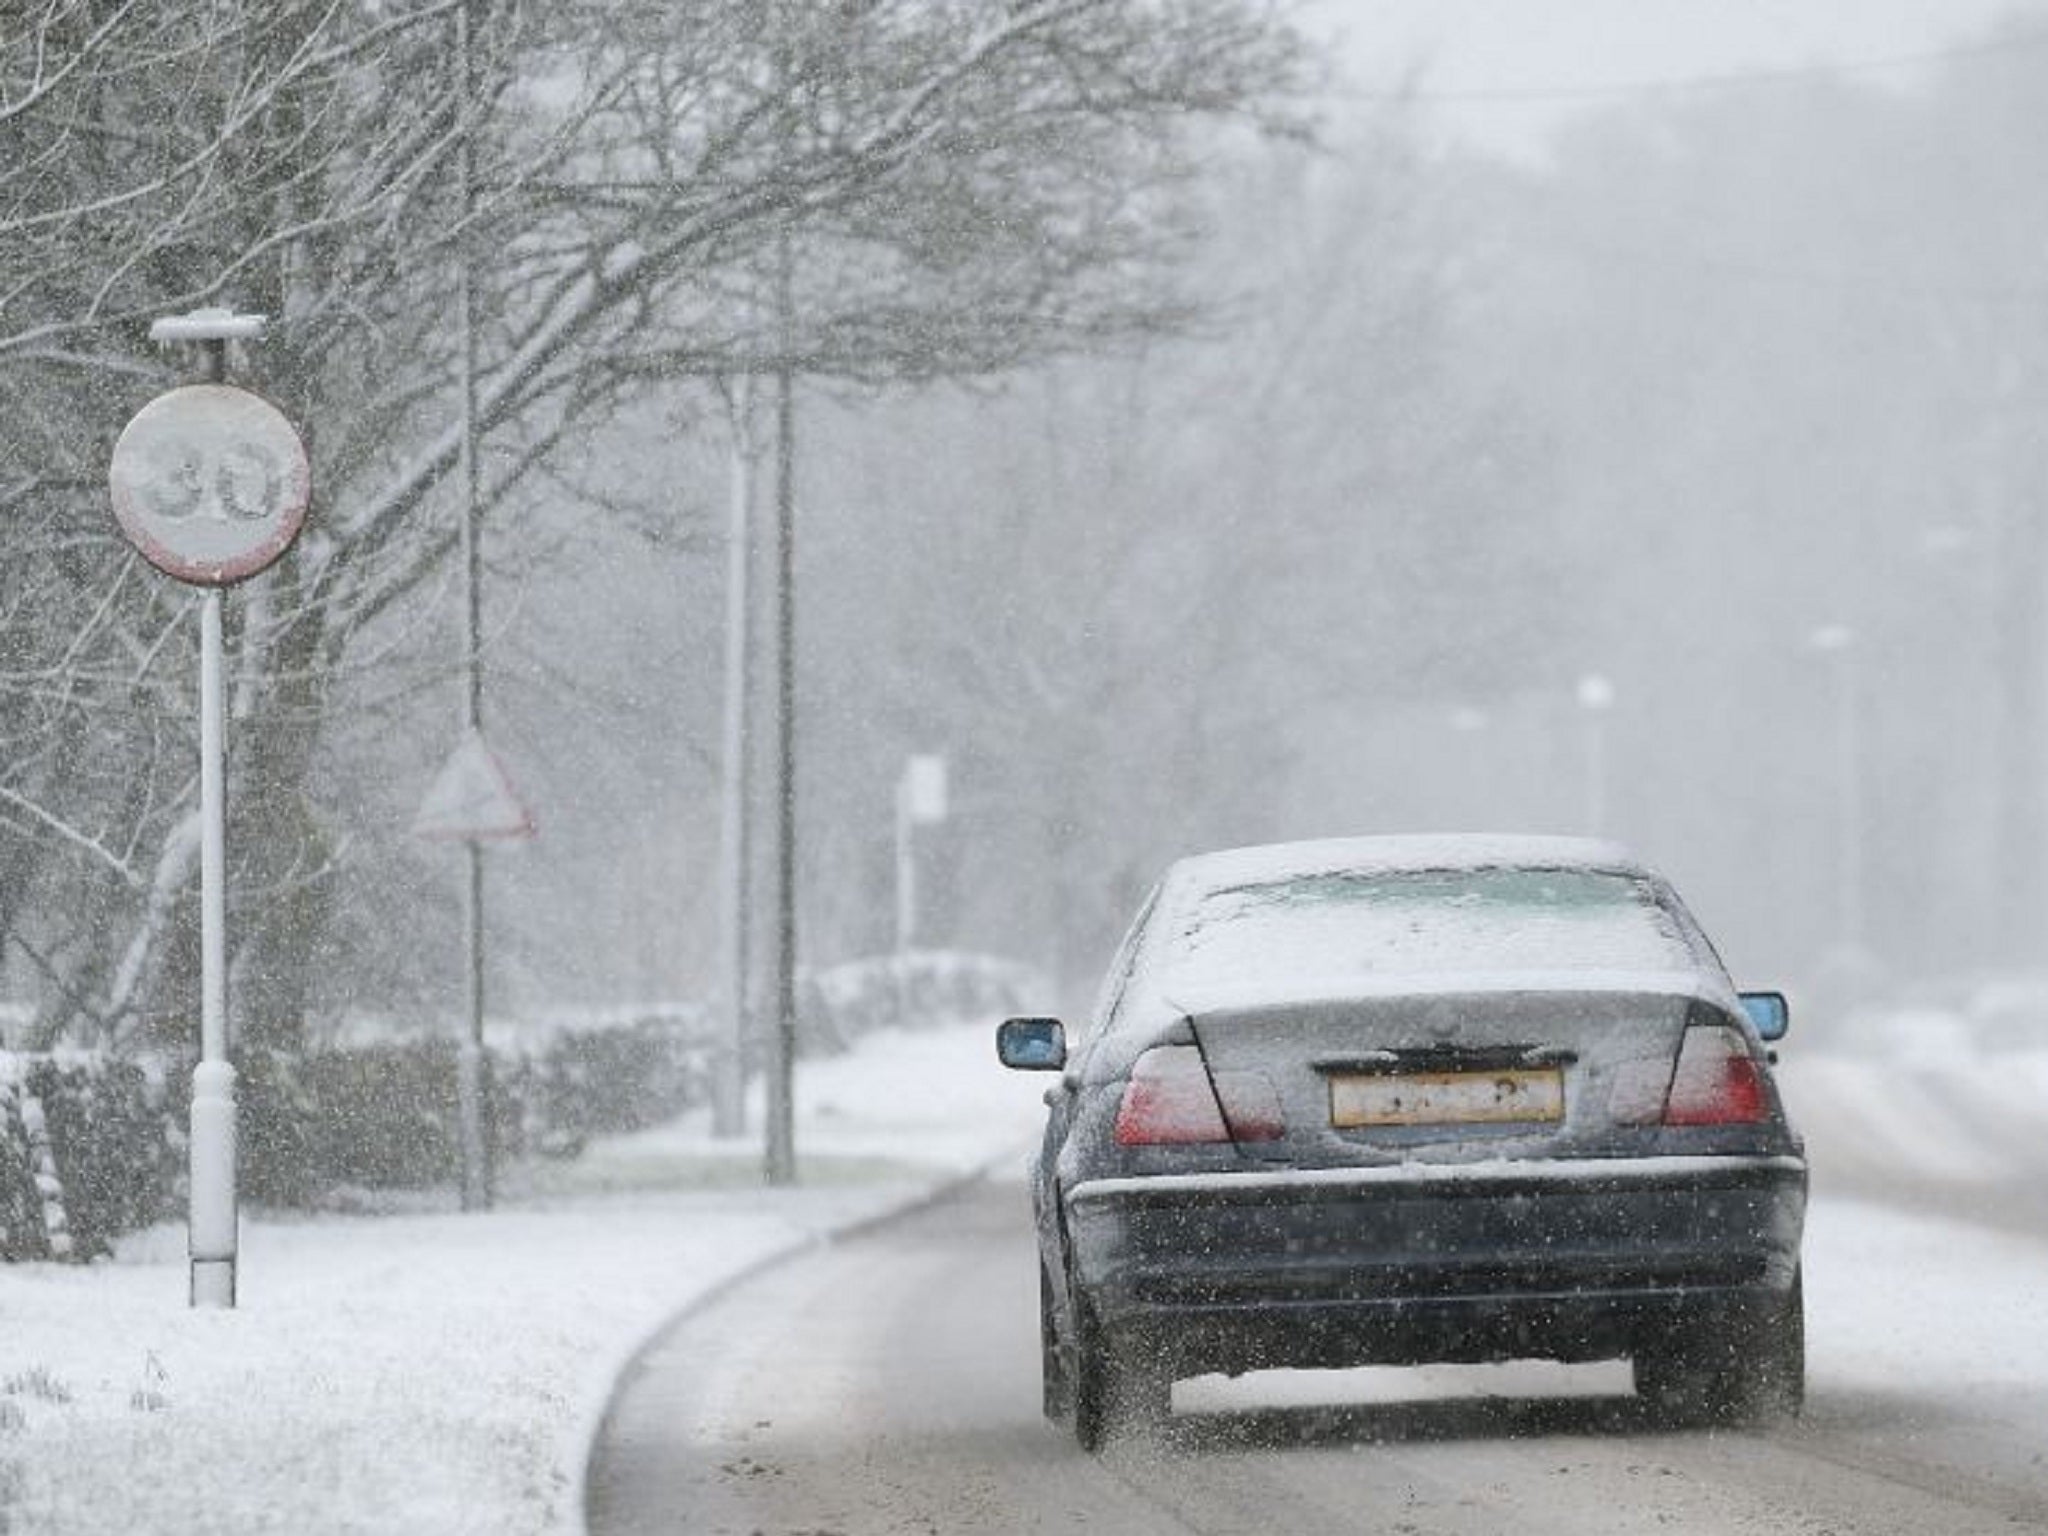 A car makes its way through sleet and snow in Buxton, Derbyshire